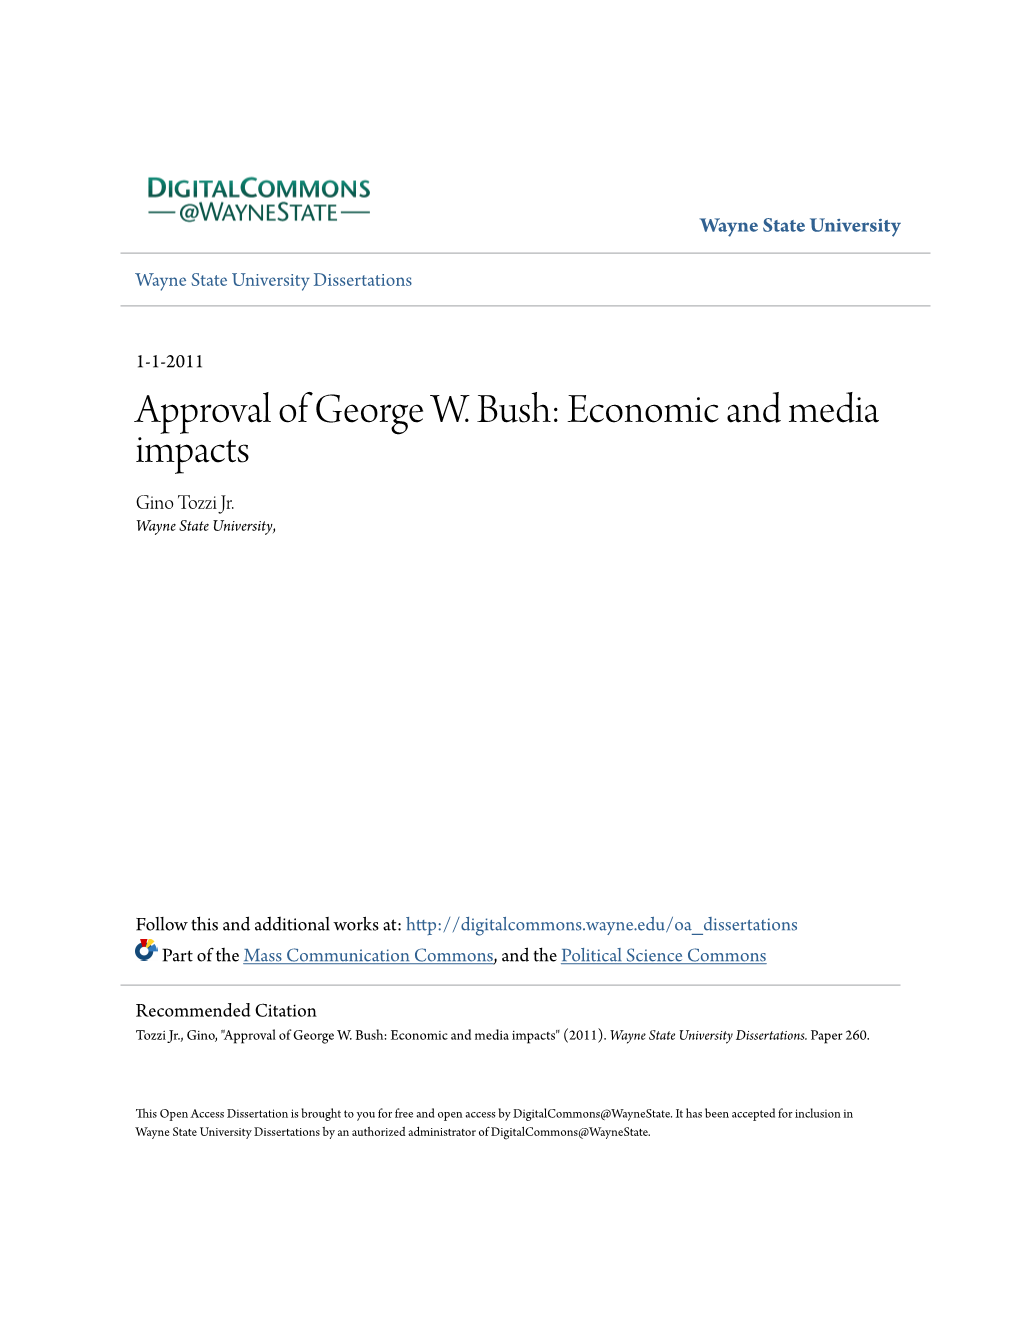 Approval of George W. Bush: Economic and Media Impacts Gino Tozzi Jr